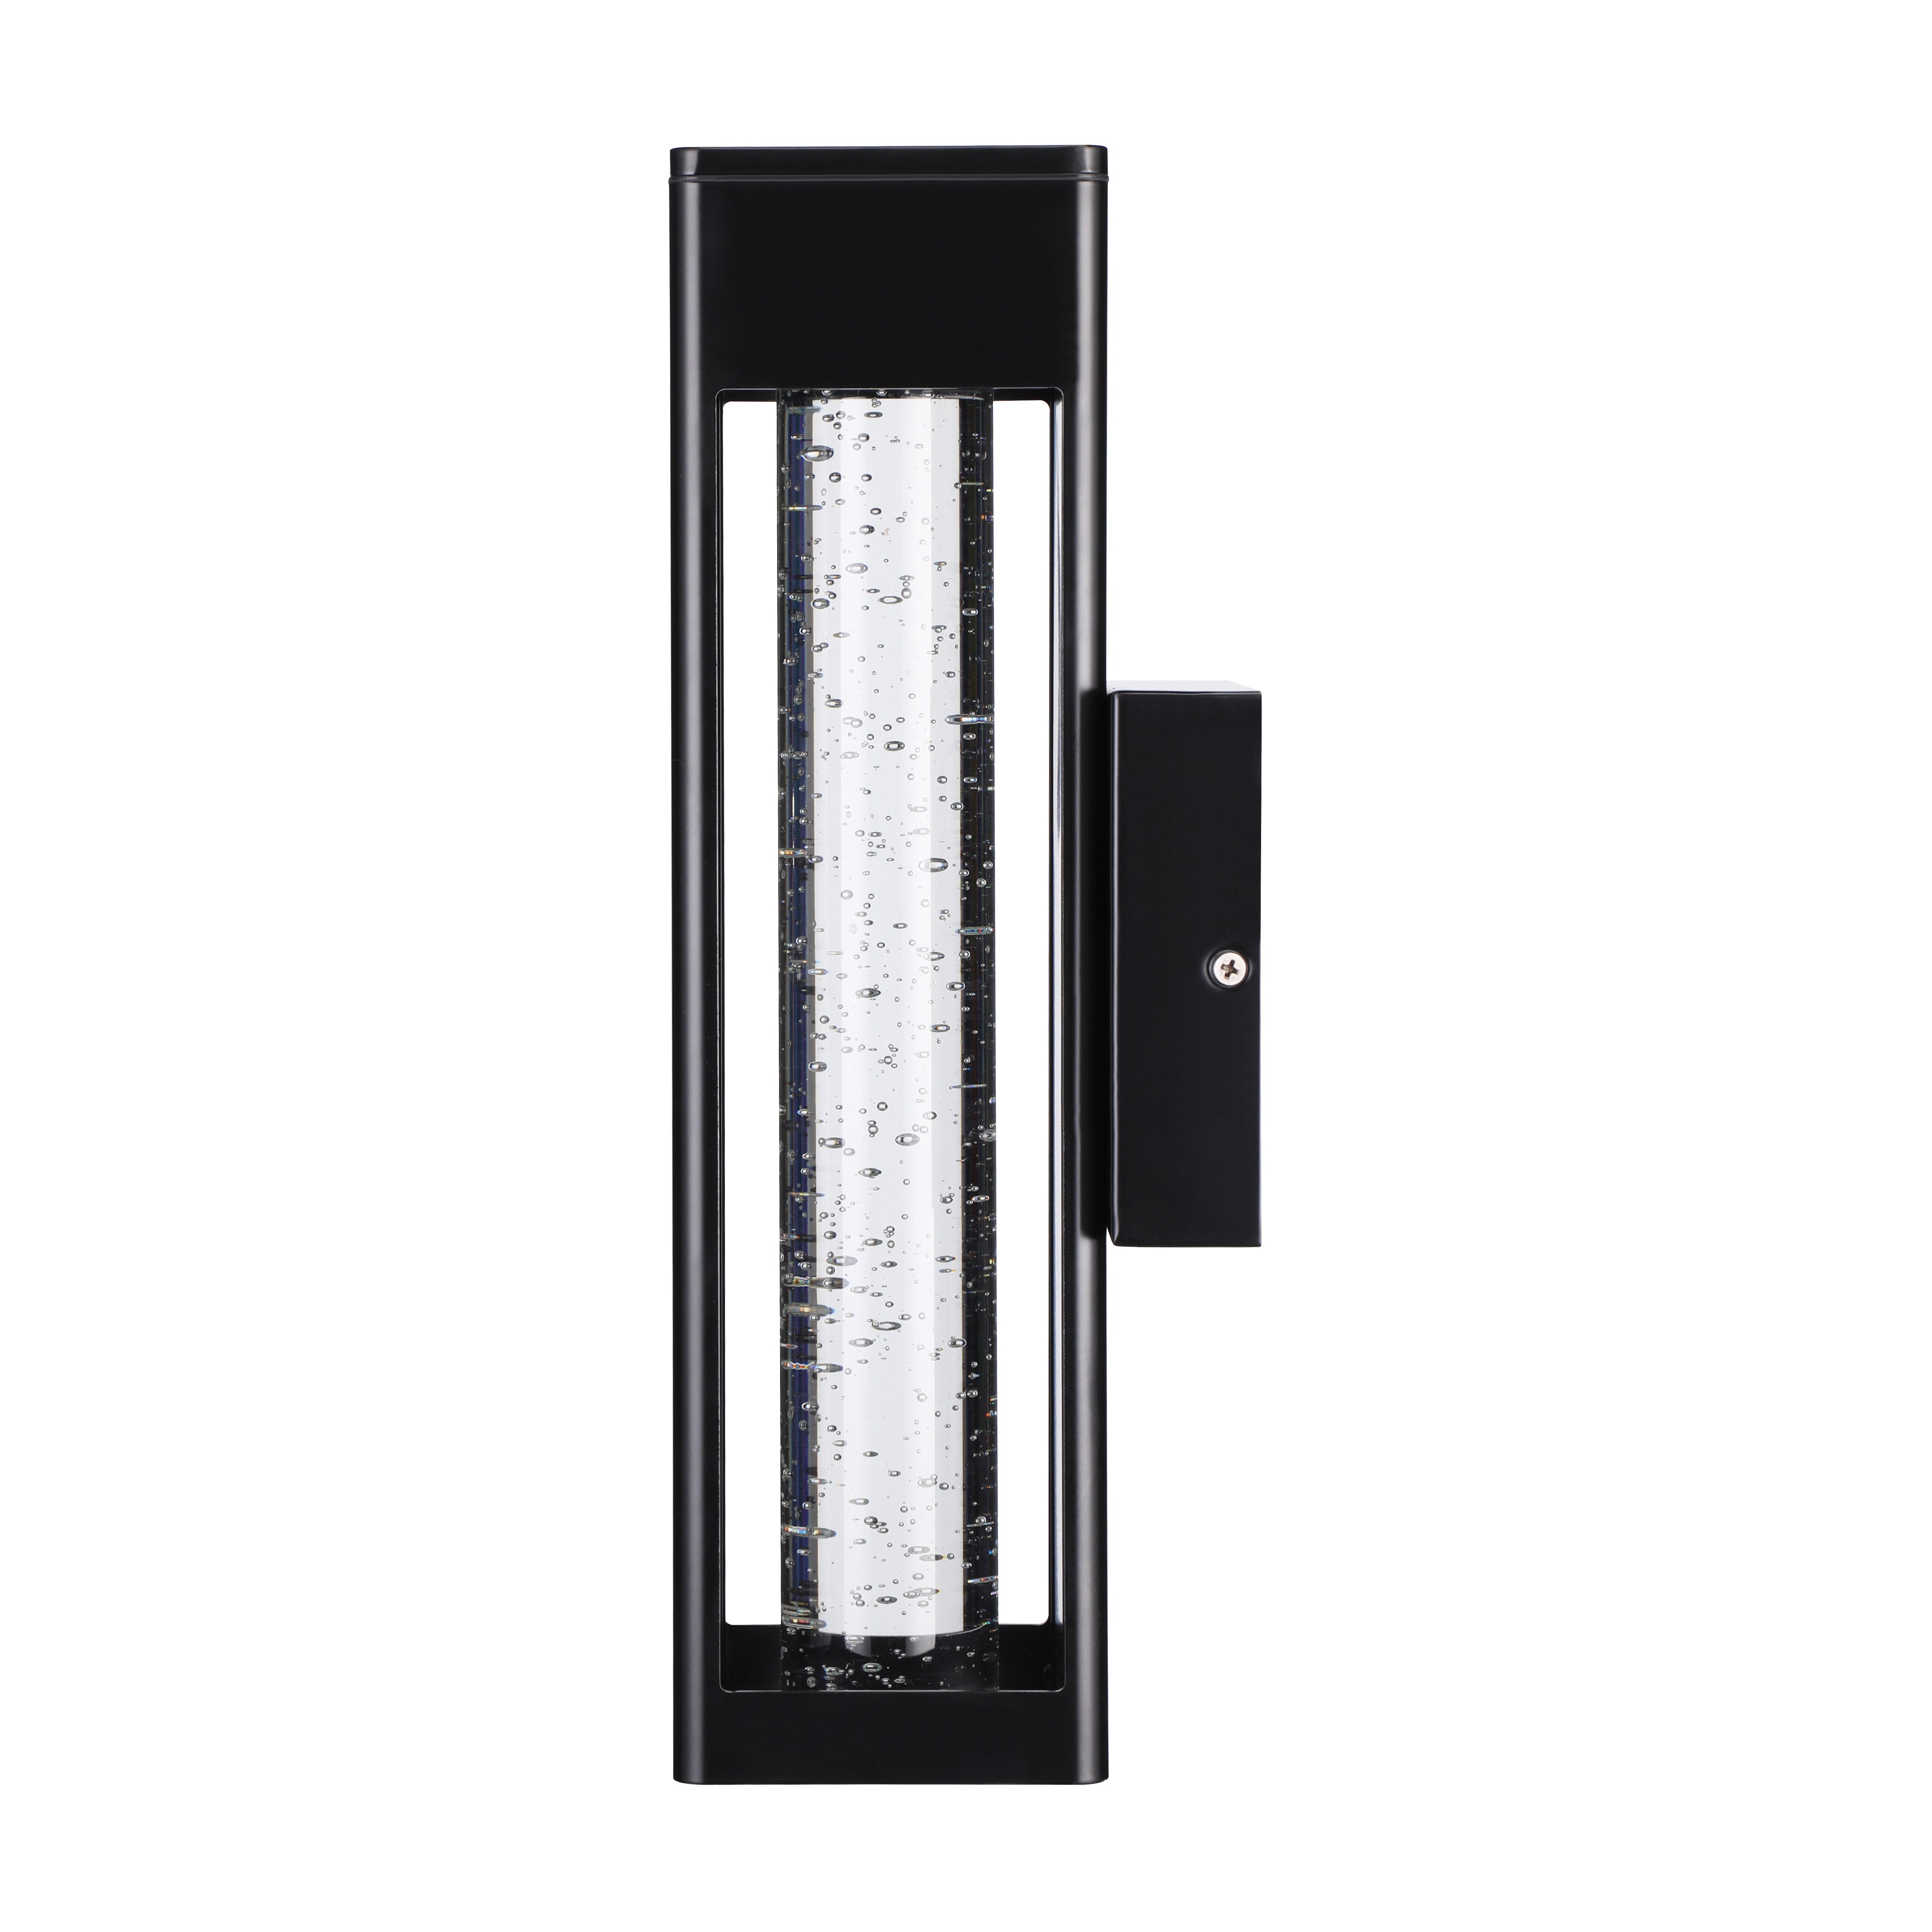 The Stella 12W Outdoor Wall Sconce